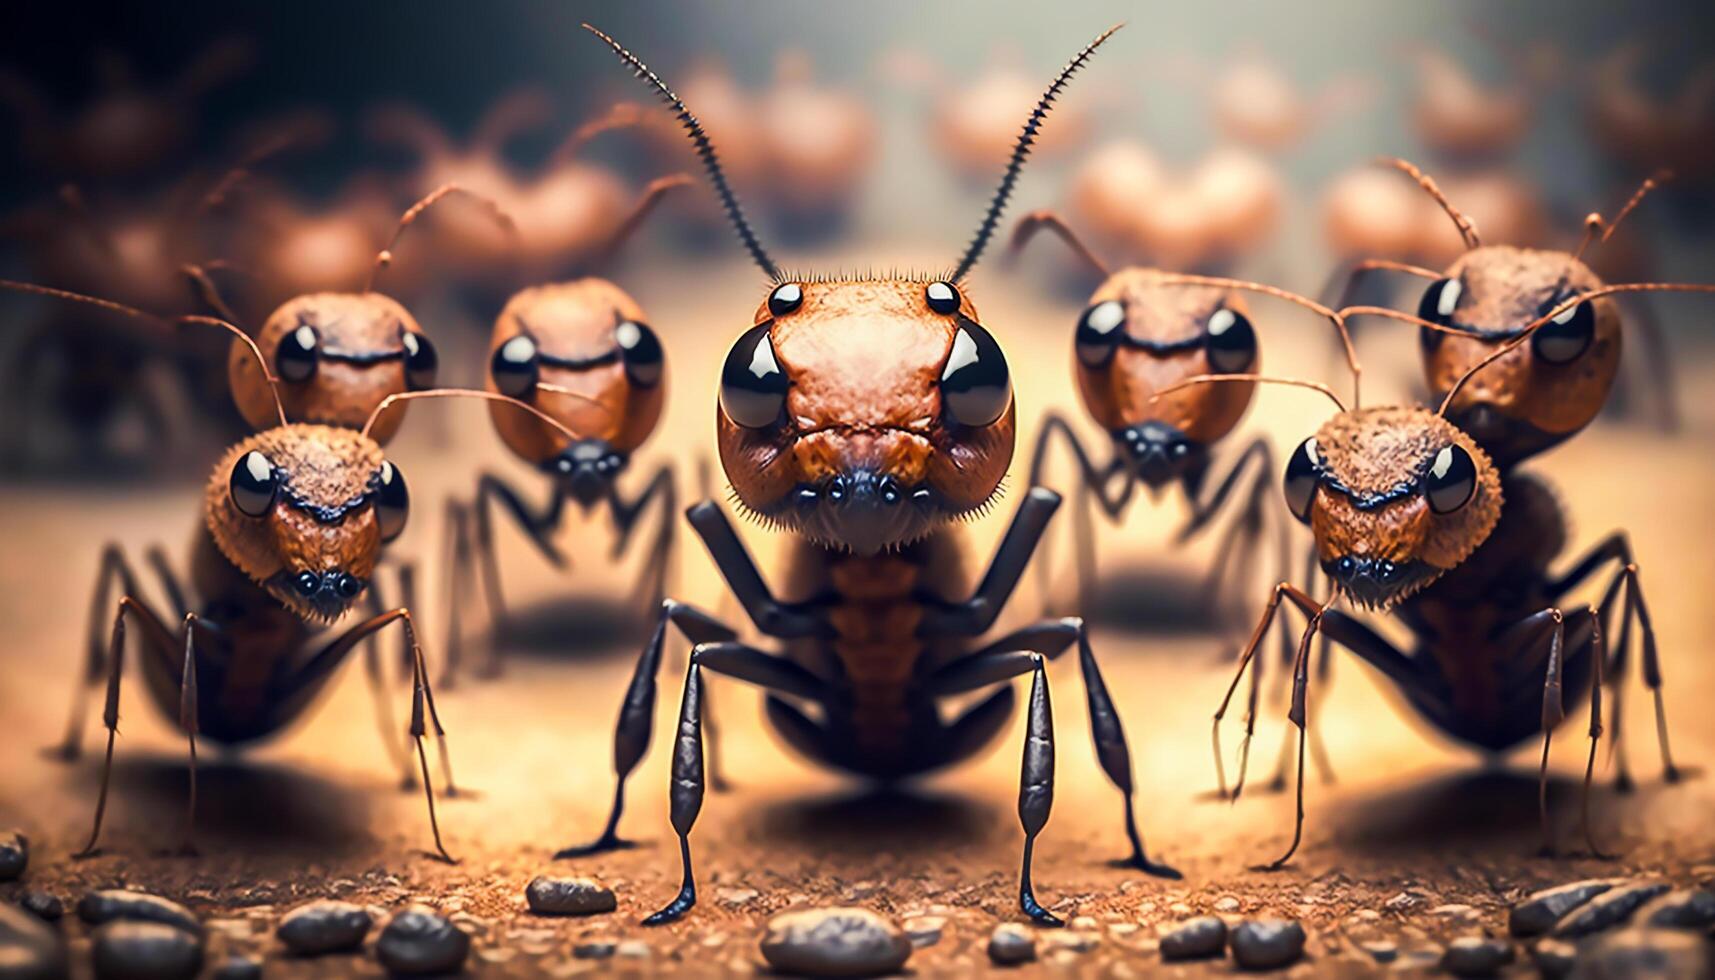 power of ant leader, teamwork concept, photo